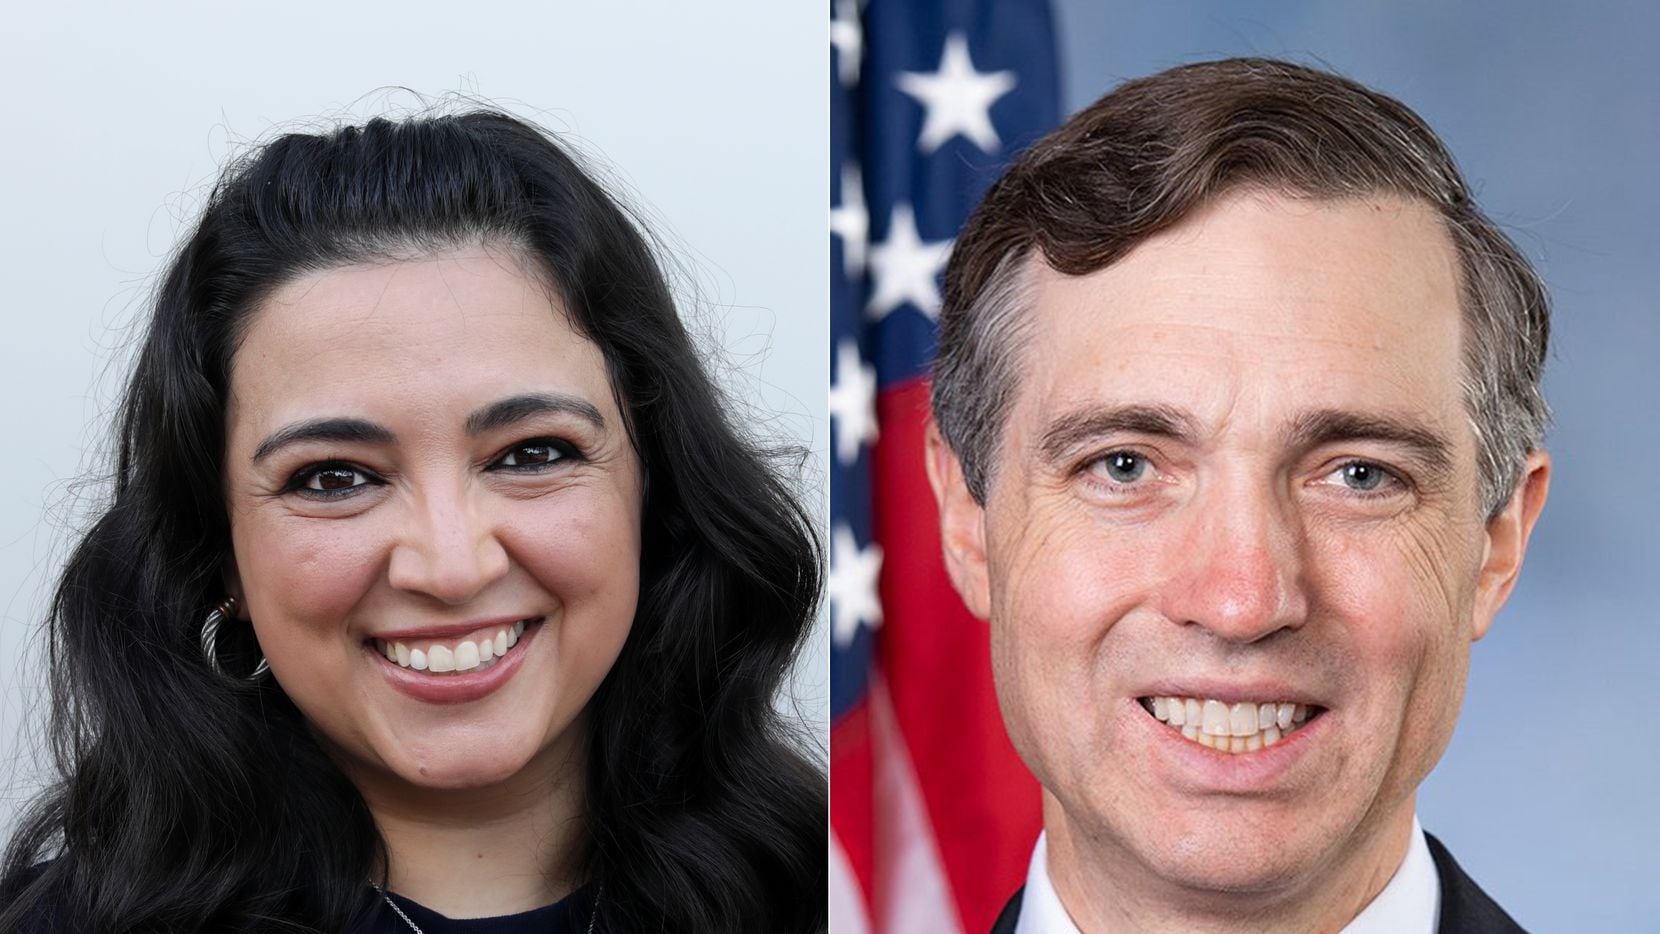 Lulu Seikaly, left, photographed in downtown Plano, TX, on Sep. 17, 2020. U.S. Rep. Van Taylor, R-Plano shown in this undated photo.